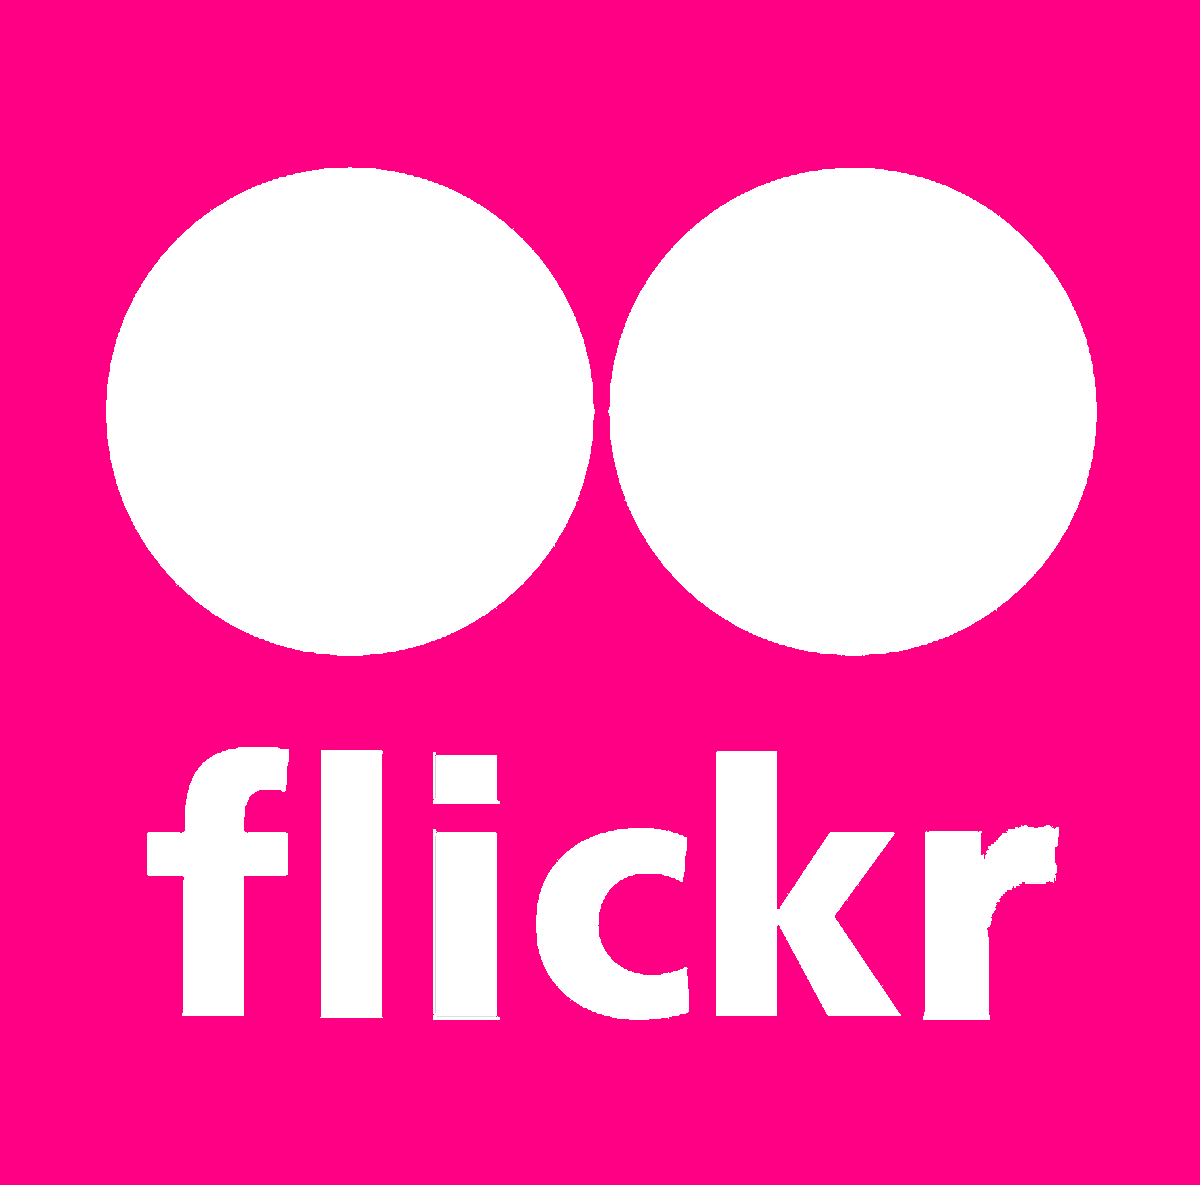 Official Flickr Logo - List of Synonyms and Antonyms of the Word: official flickr logo vector